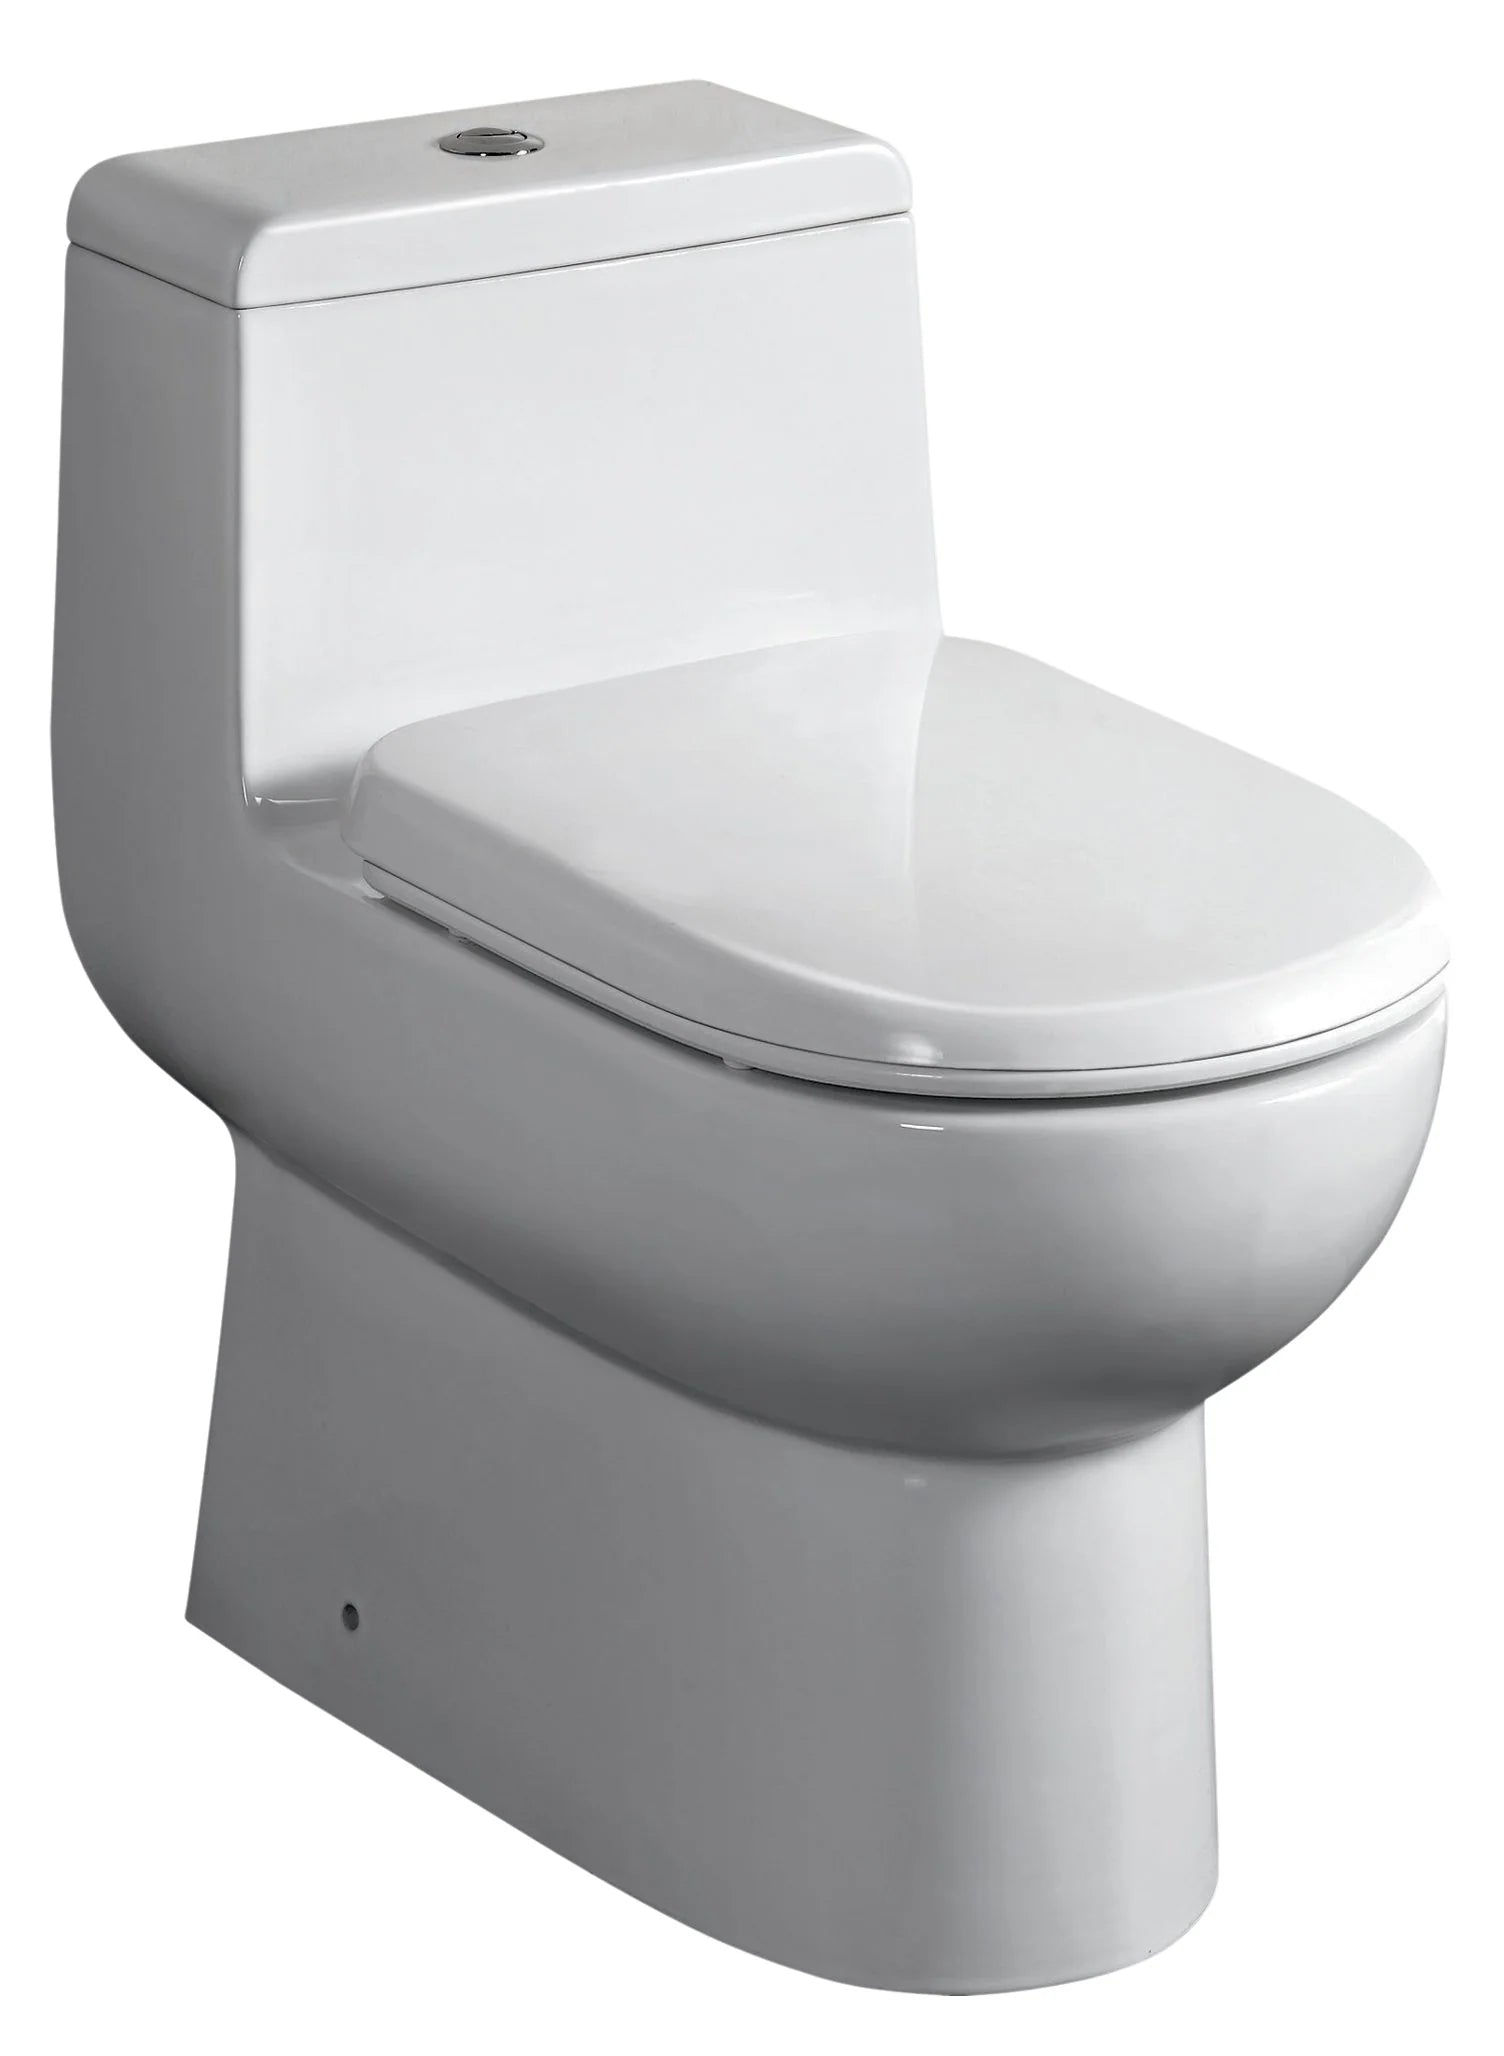 WHITEHAUS Magic Flush Eco-friendly One Piece Toilet With A Siphonic Action Dual Flush System, Elongated Bowl 1.6/1.1 Gpf - Bathroom Design Center